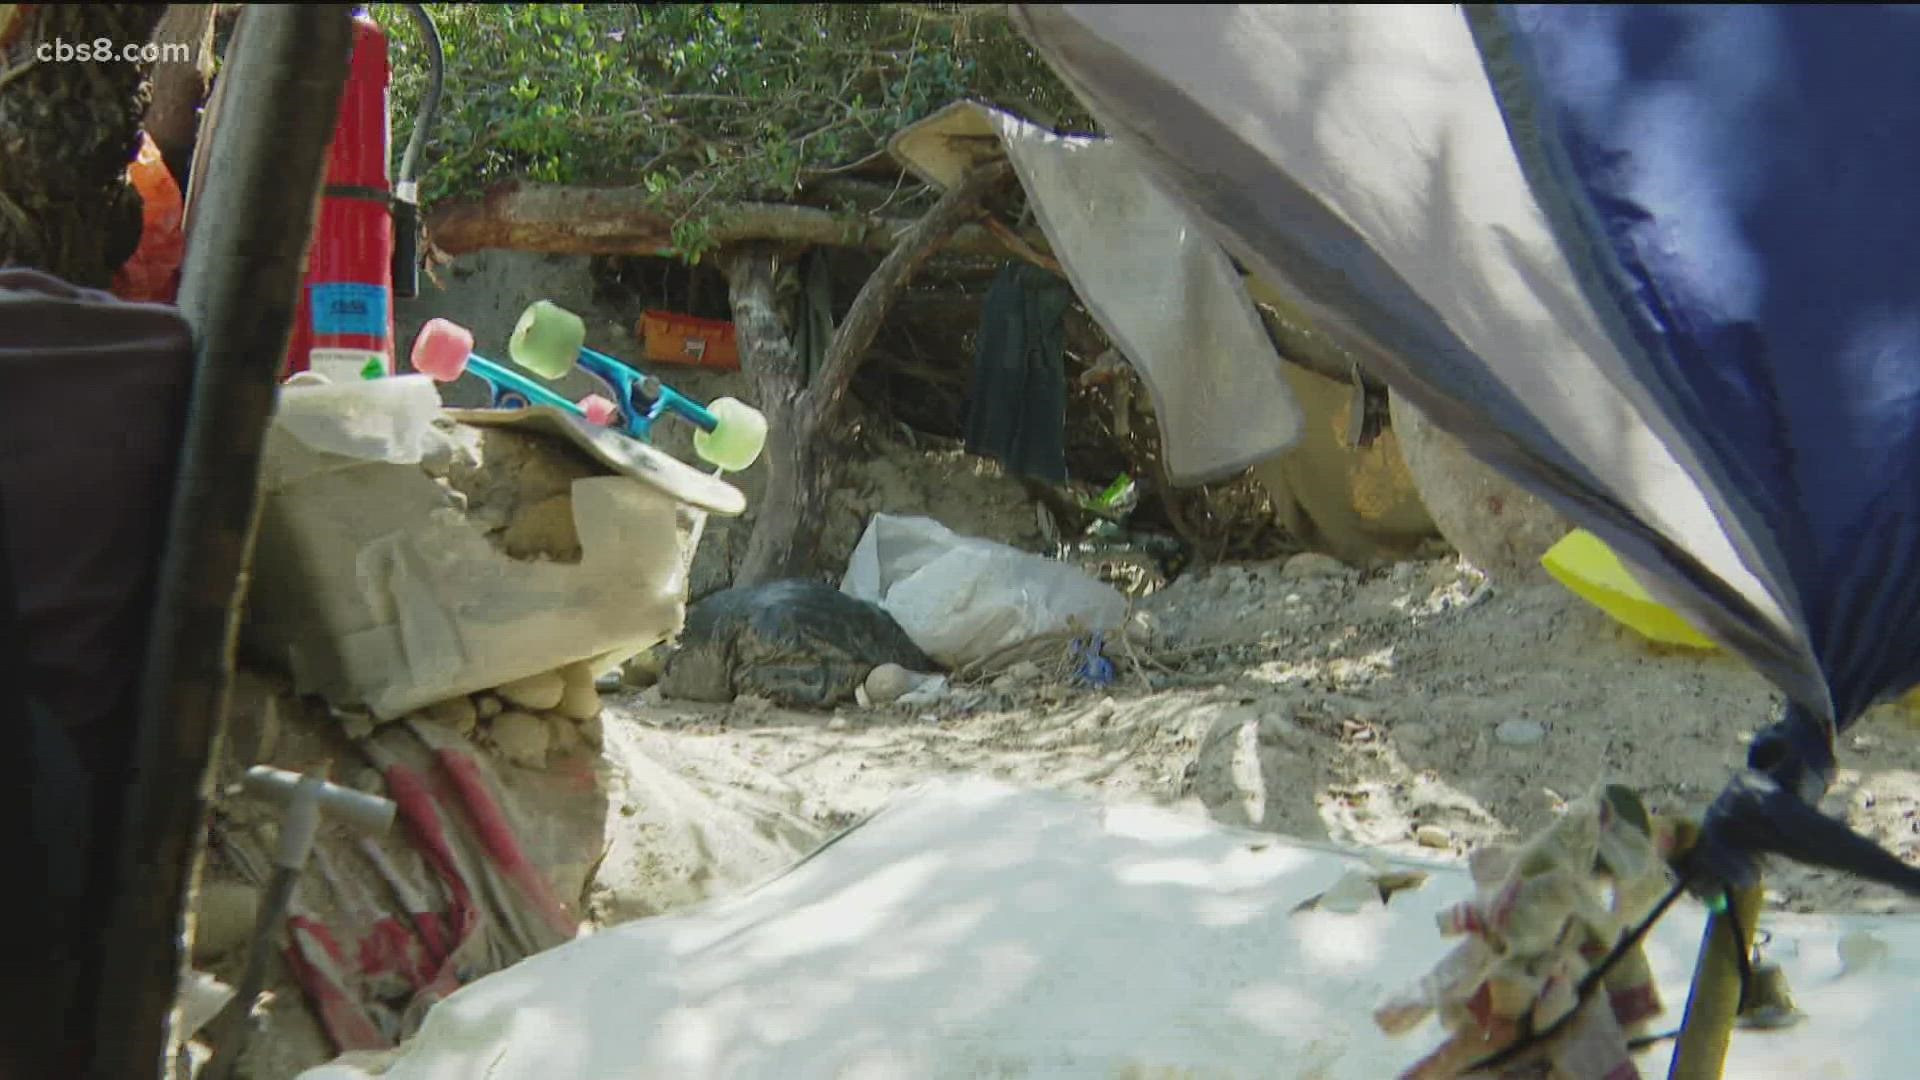 Its been five years since News 8 reported on a homeless encampment in Mission Valley.